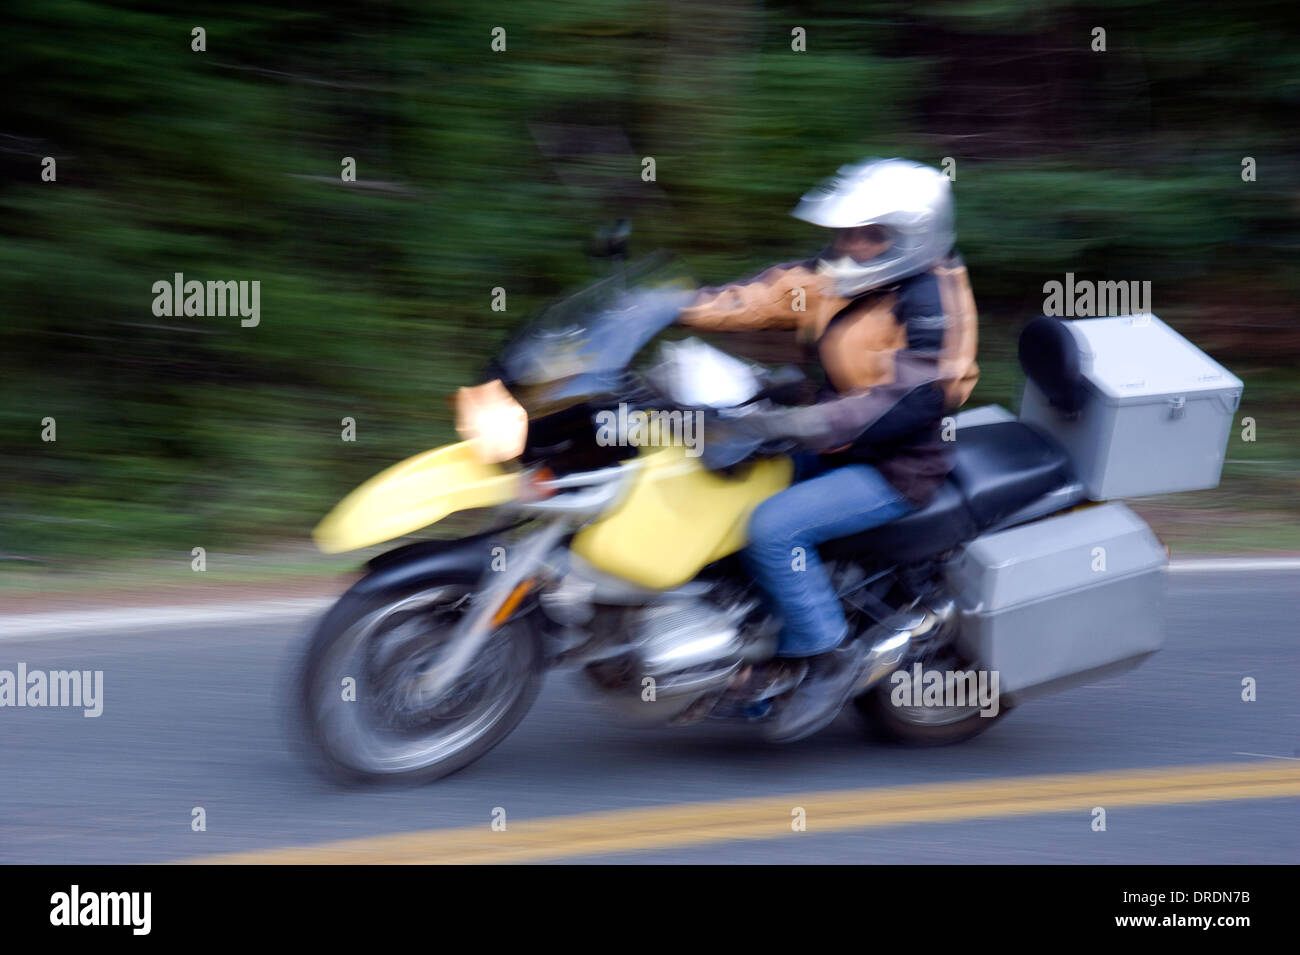 Motorcycle in motion Stock Photo